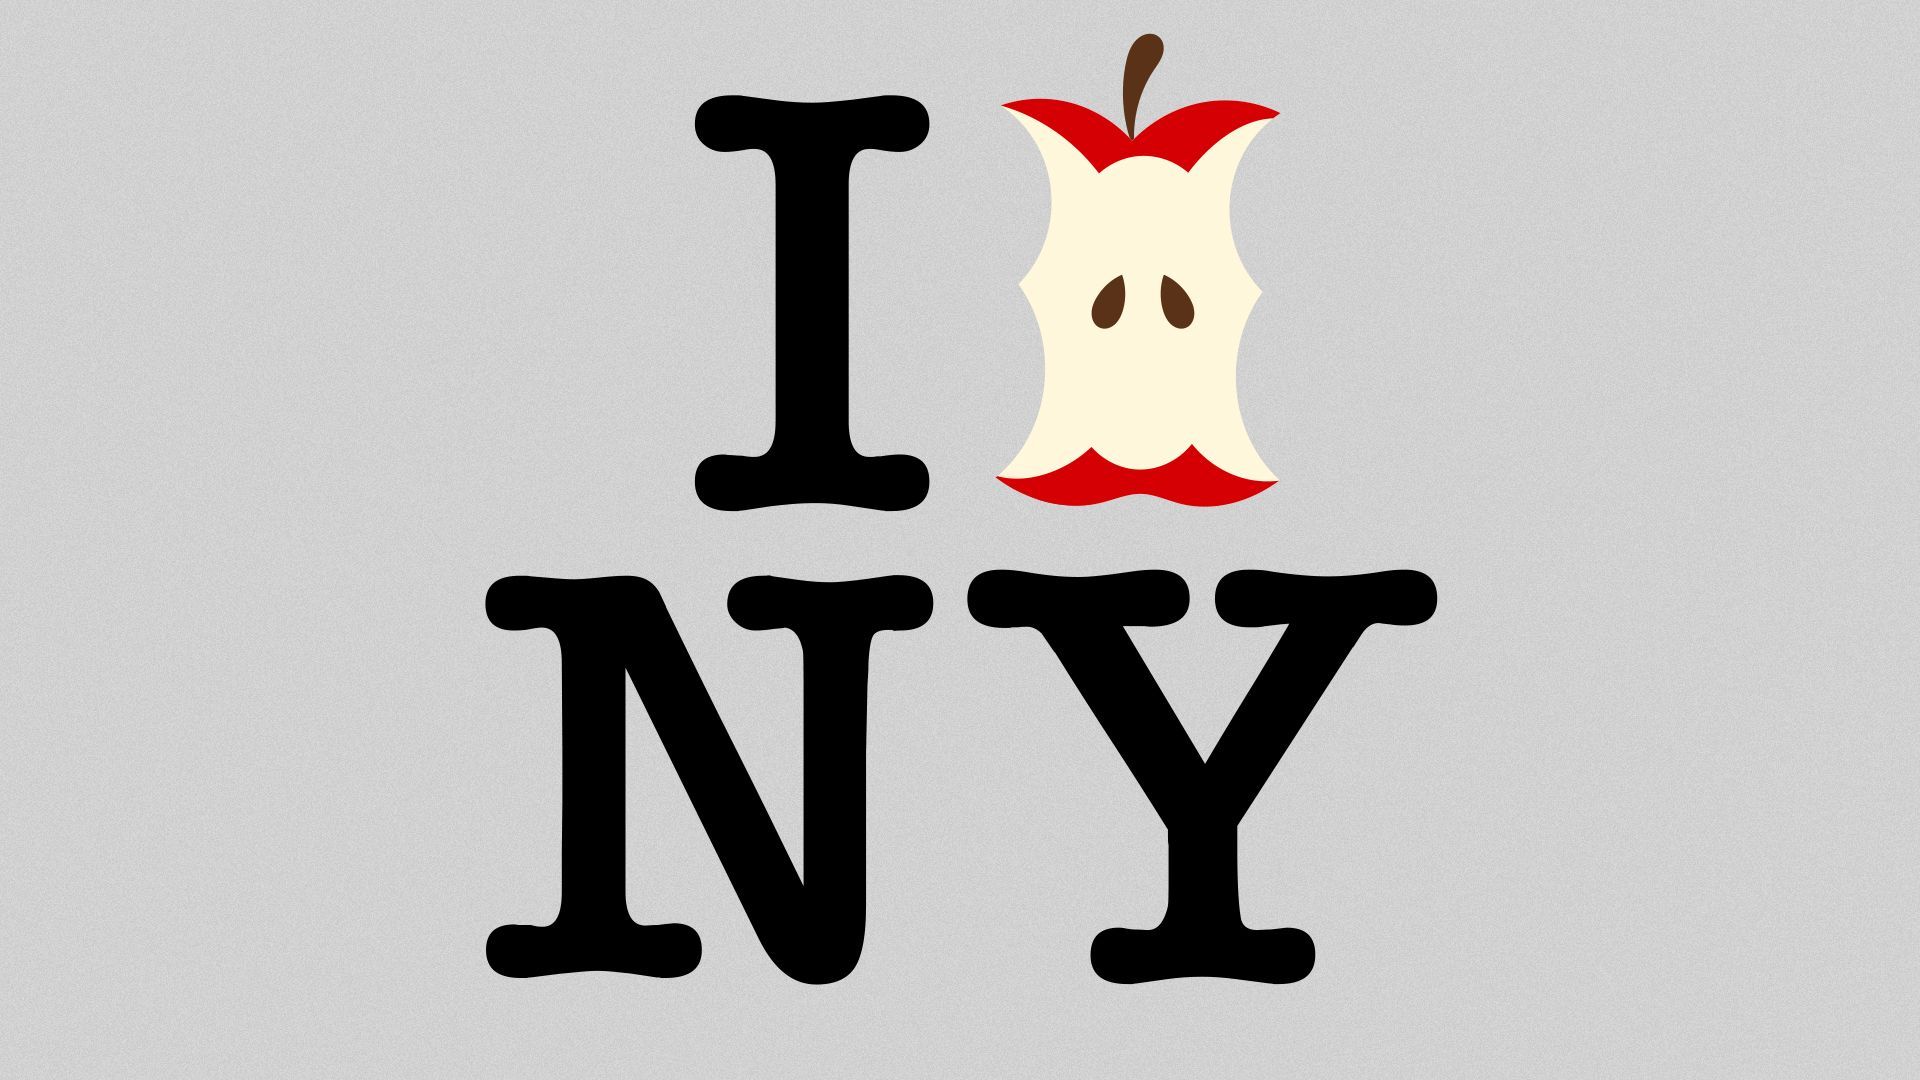 Illustration of the I Heart NY logo with an apple core replacing the heart.